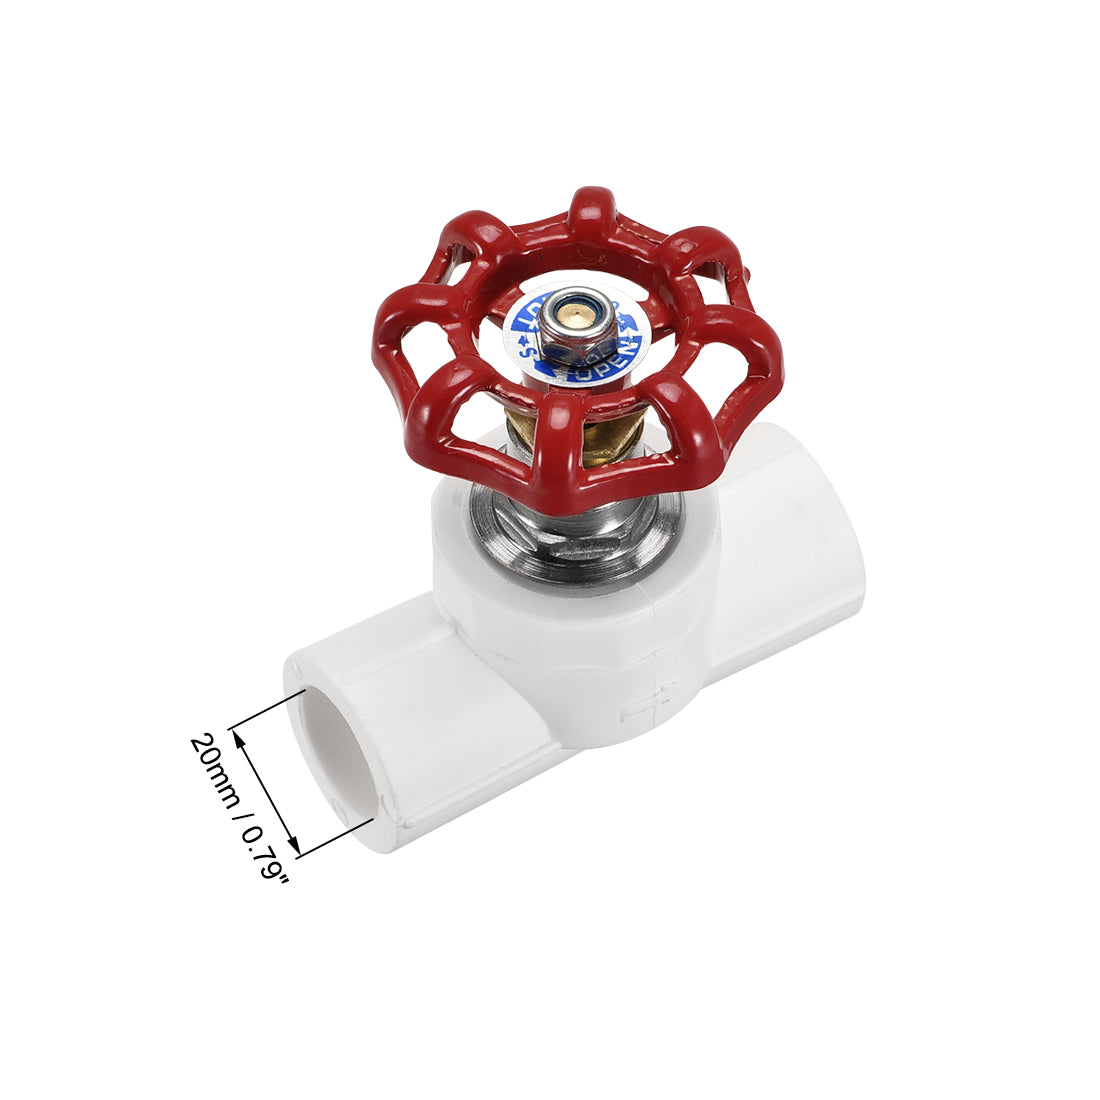 uxcell Uxcell Gate Valve Socket, 20mm Inner Diameter, for Control Water Flow, PPR White Red 2Pcs